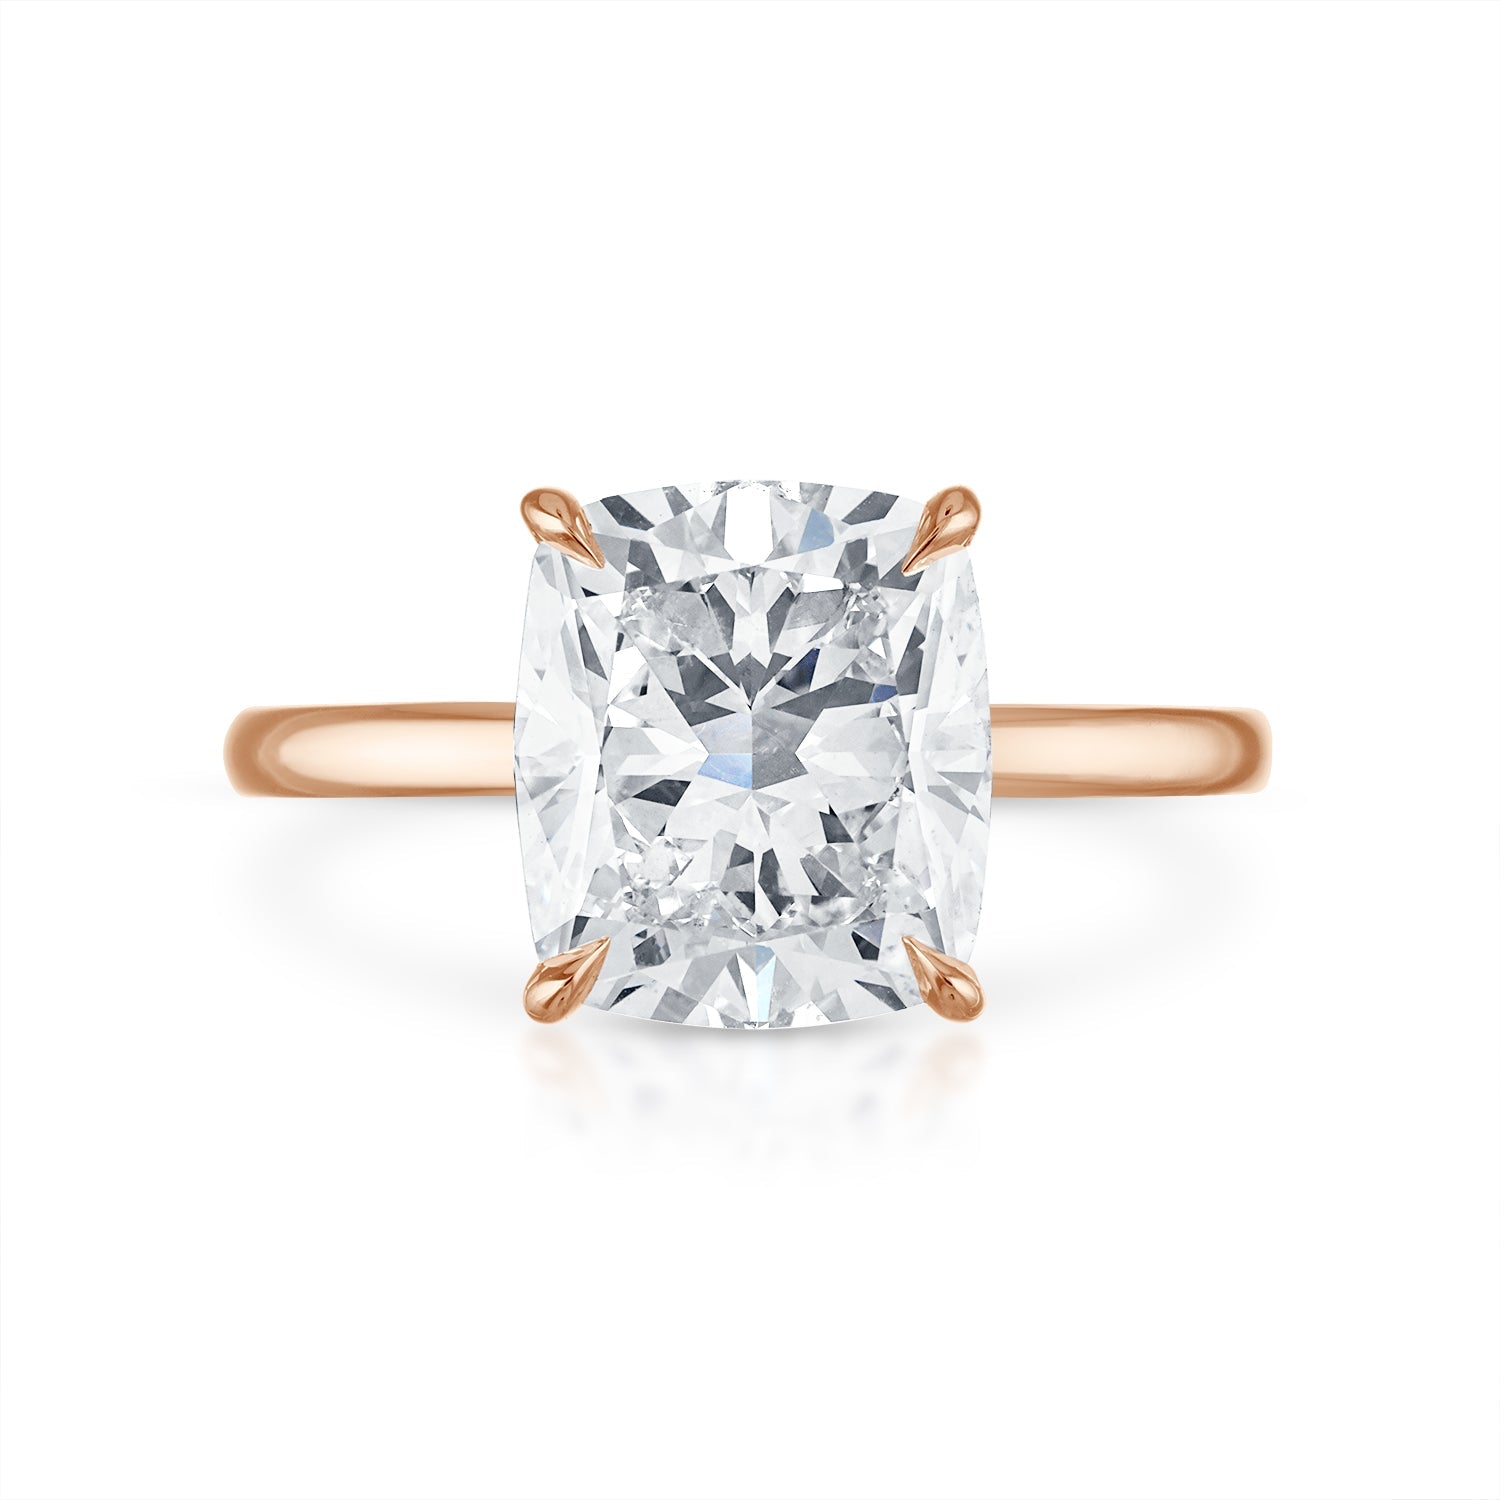 4.02ct Cushion Cut Solitaire with Pave Bezel Engagement Ring